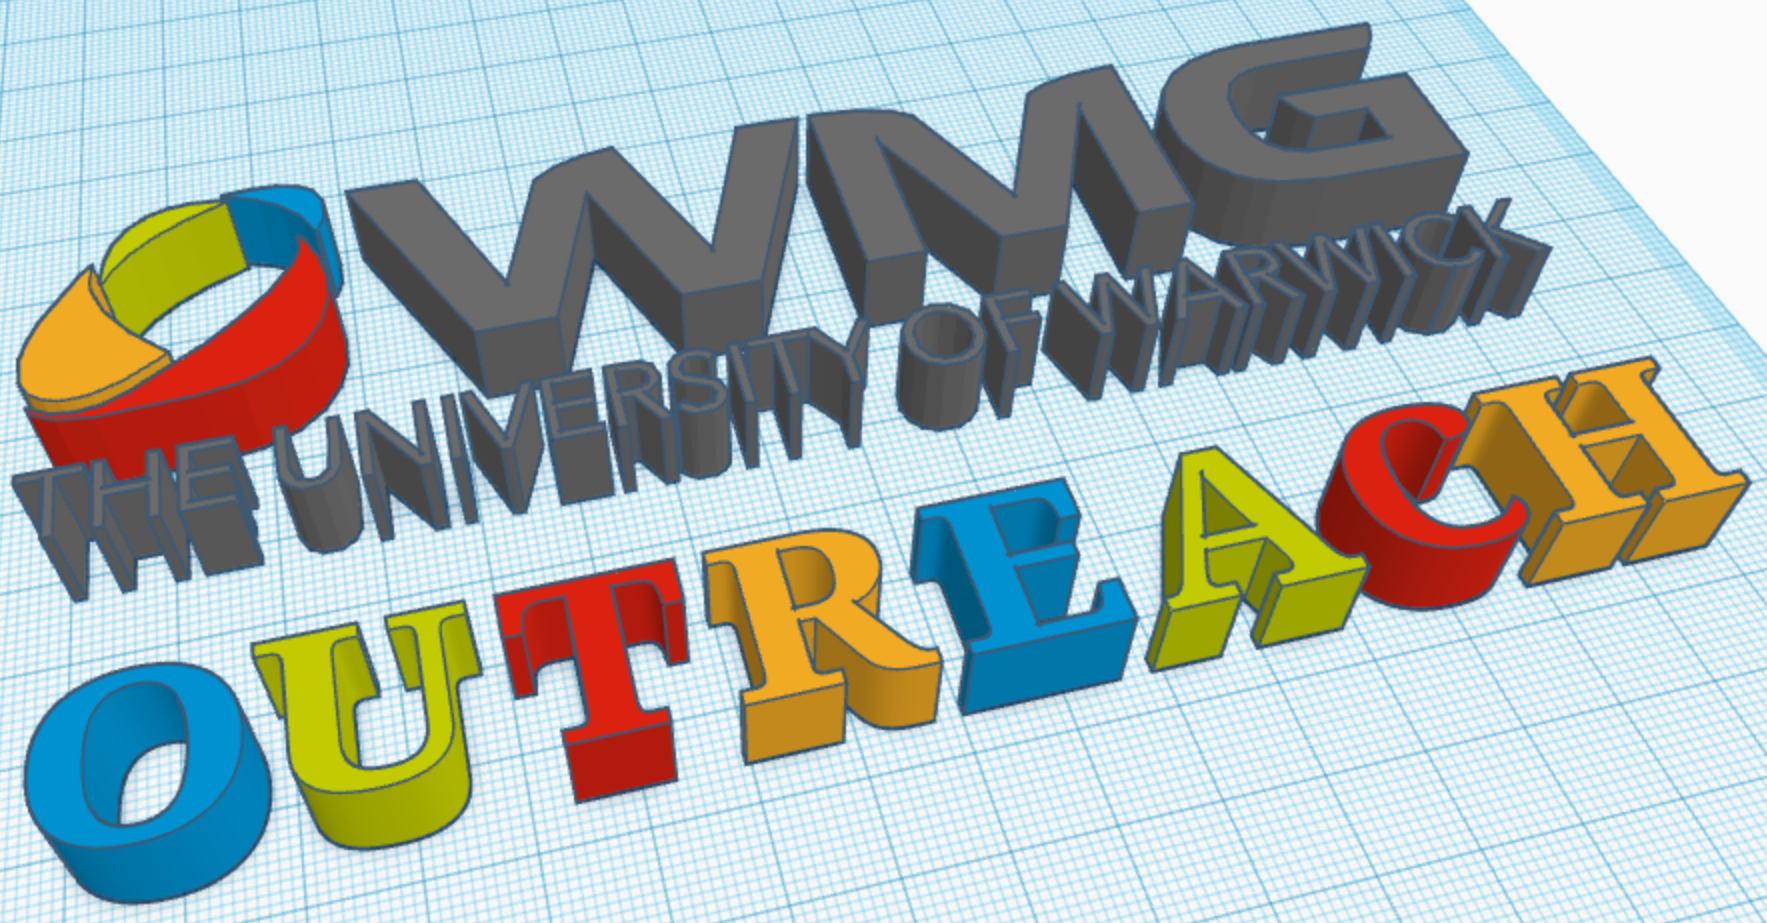 The WMG Logo and the word 'outreach' are shown in 3D shapes made using TinkerCAD